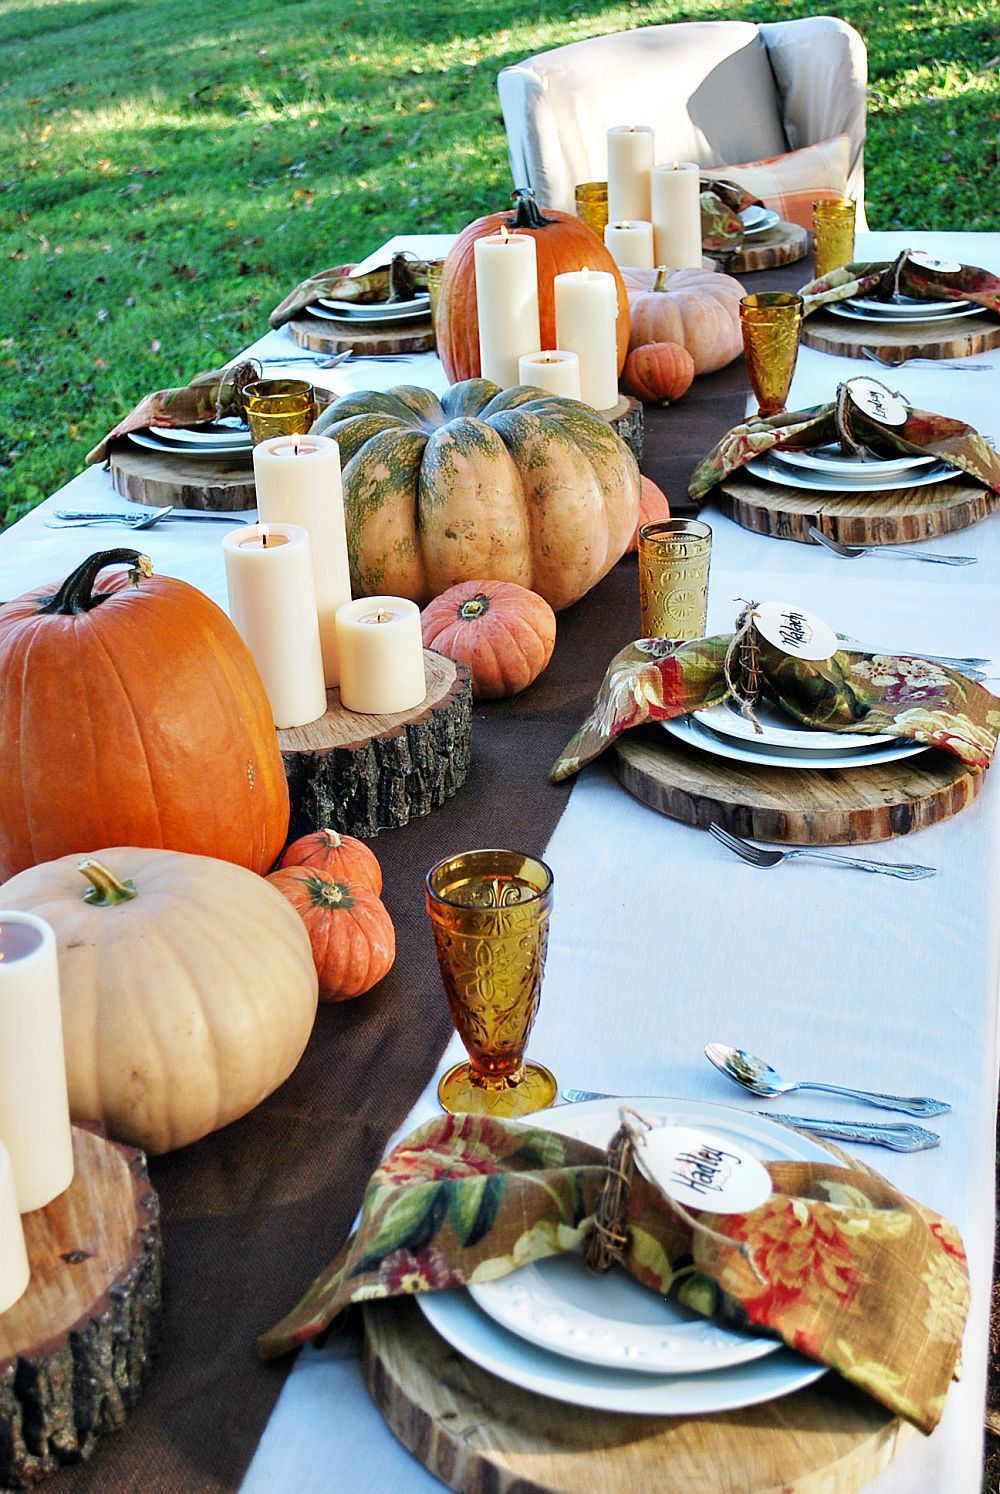 Thanksgiving Table Decorating Ideas
 15 Outdoor Thanksgiving Table Settings for Dining Alfresco